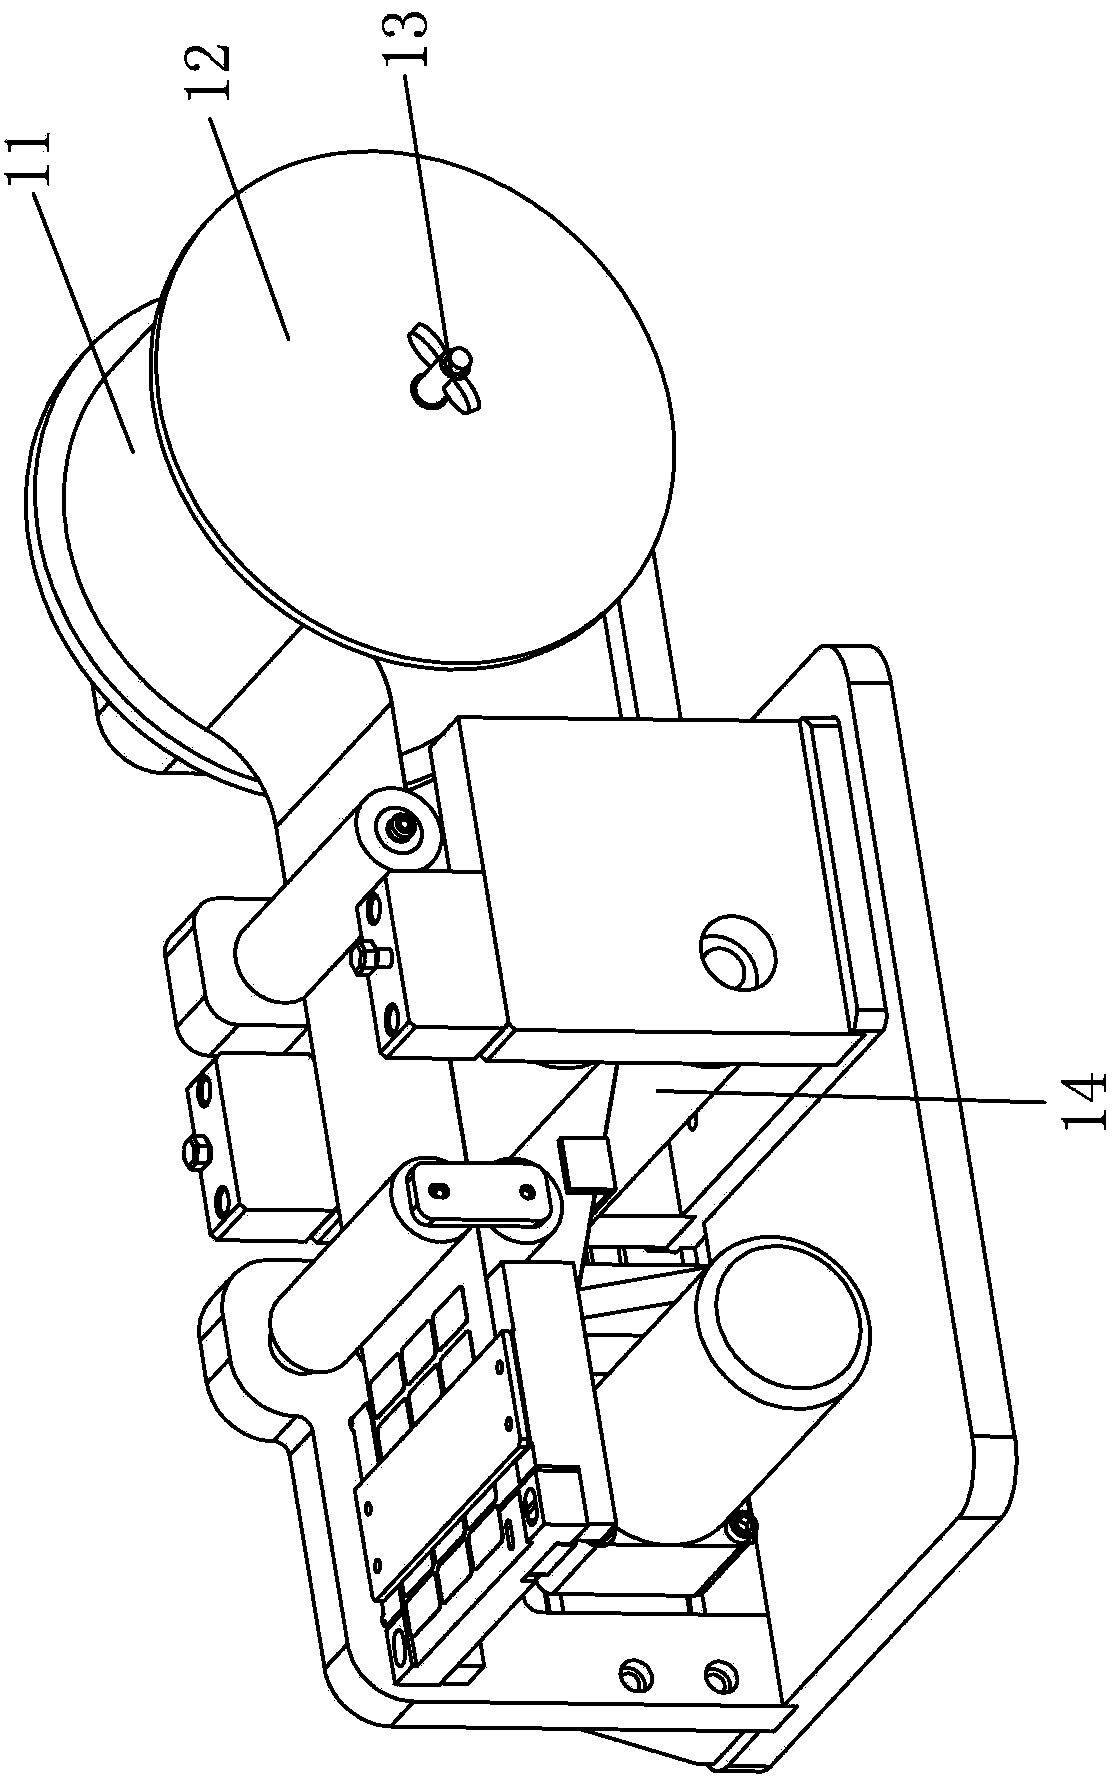 Automatic feeding and stripping mechanism